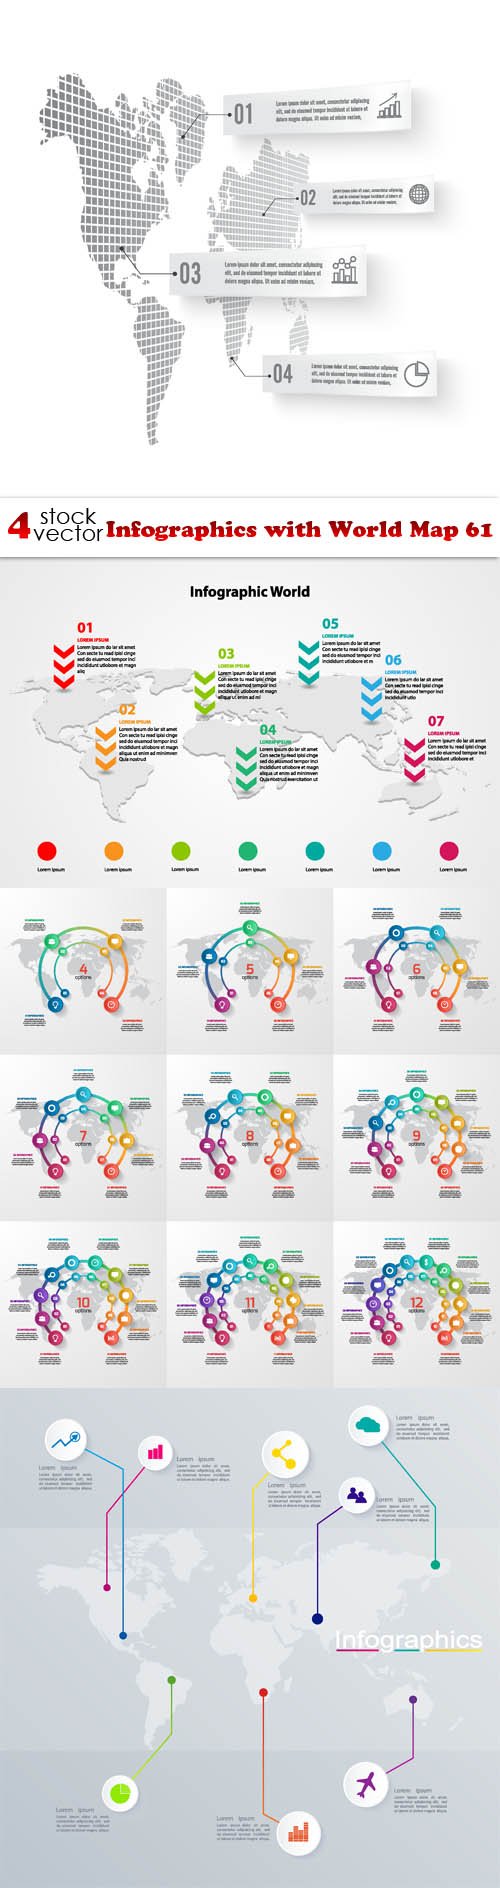 Vectors - Infographics with World Map 61